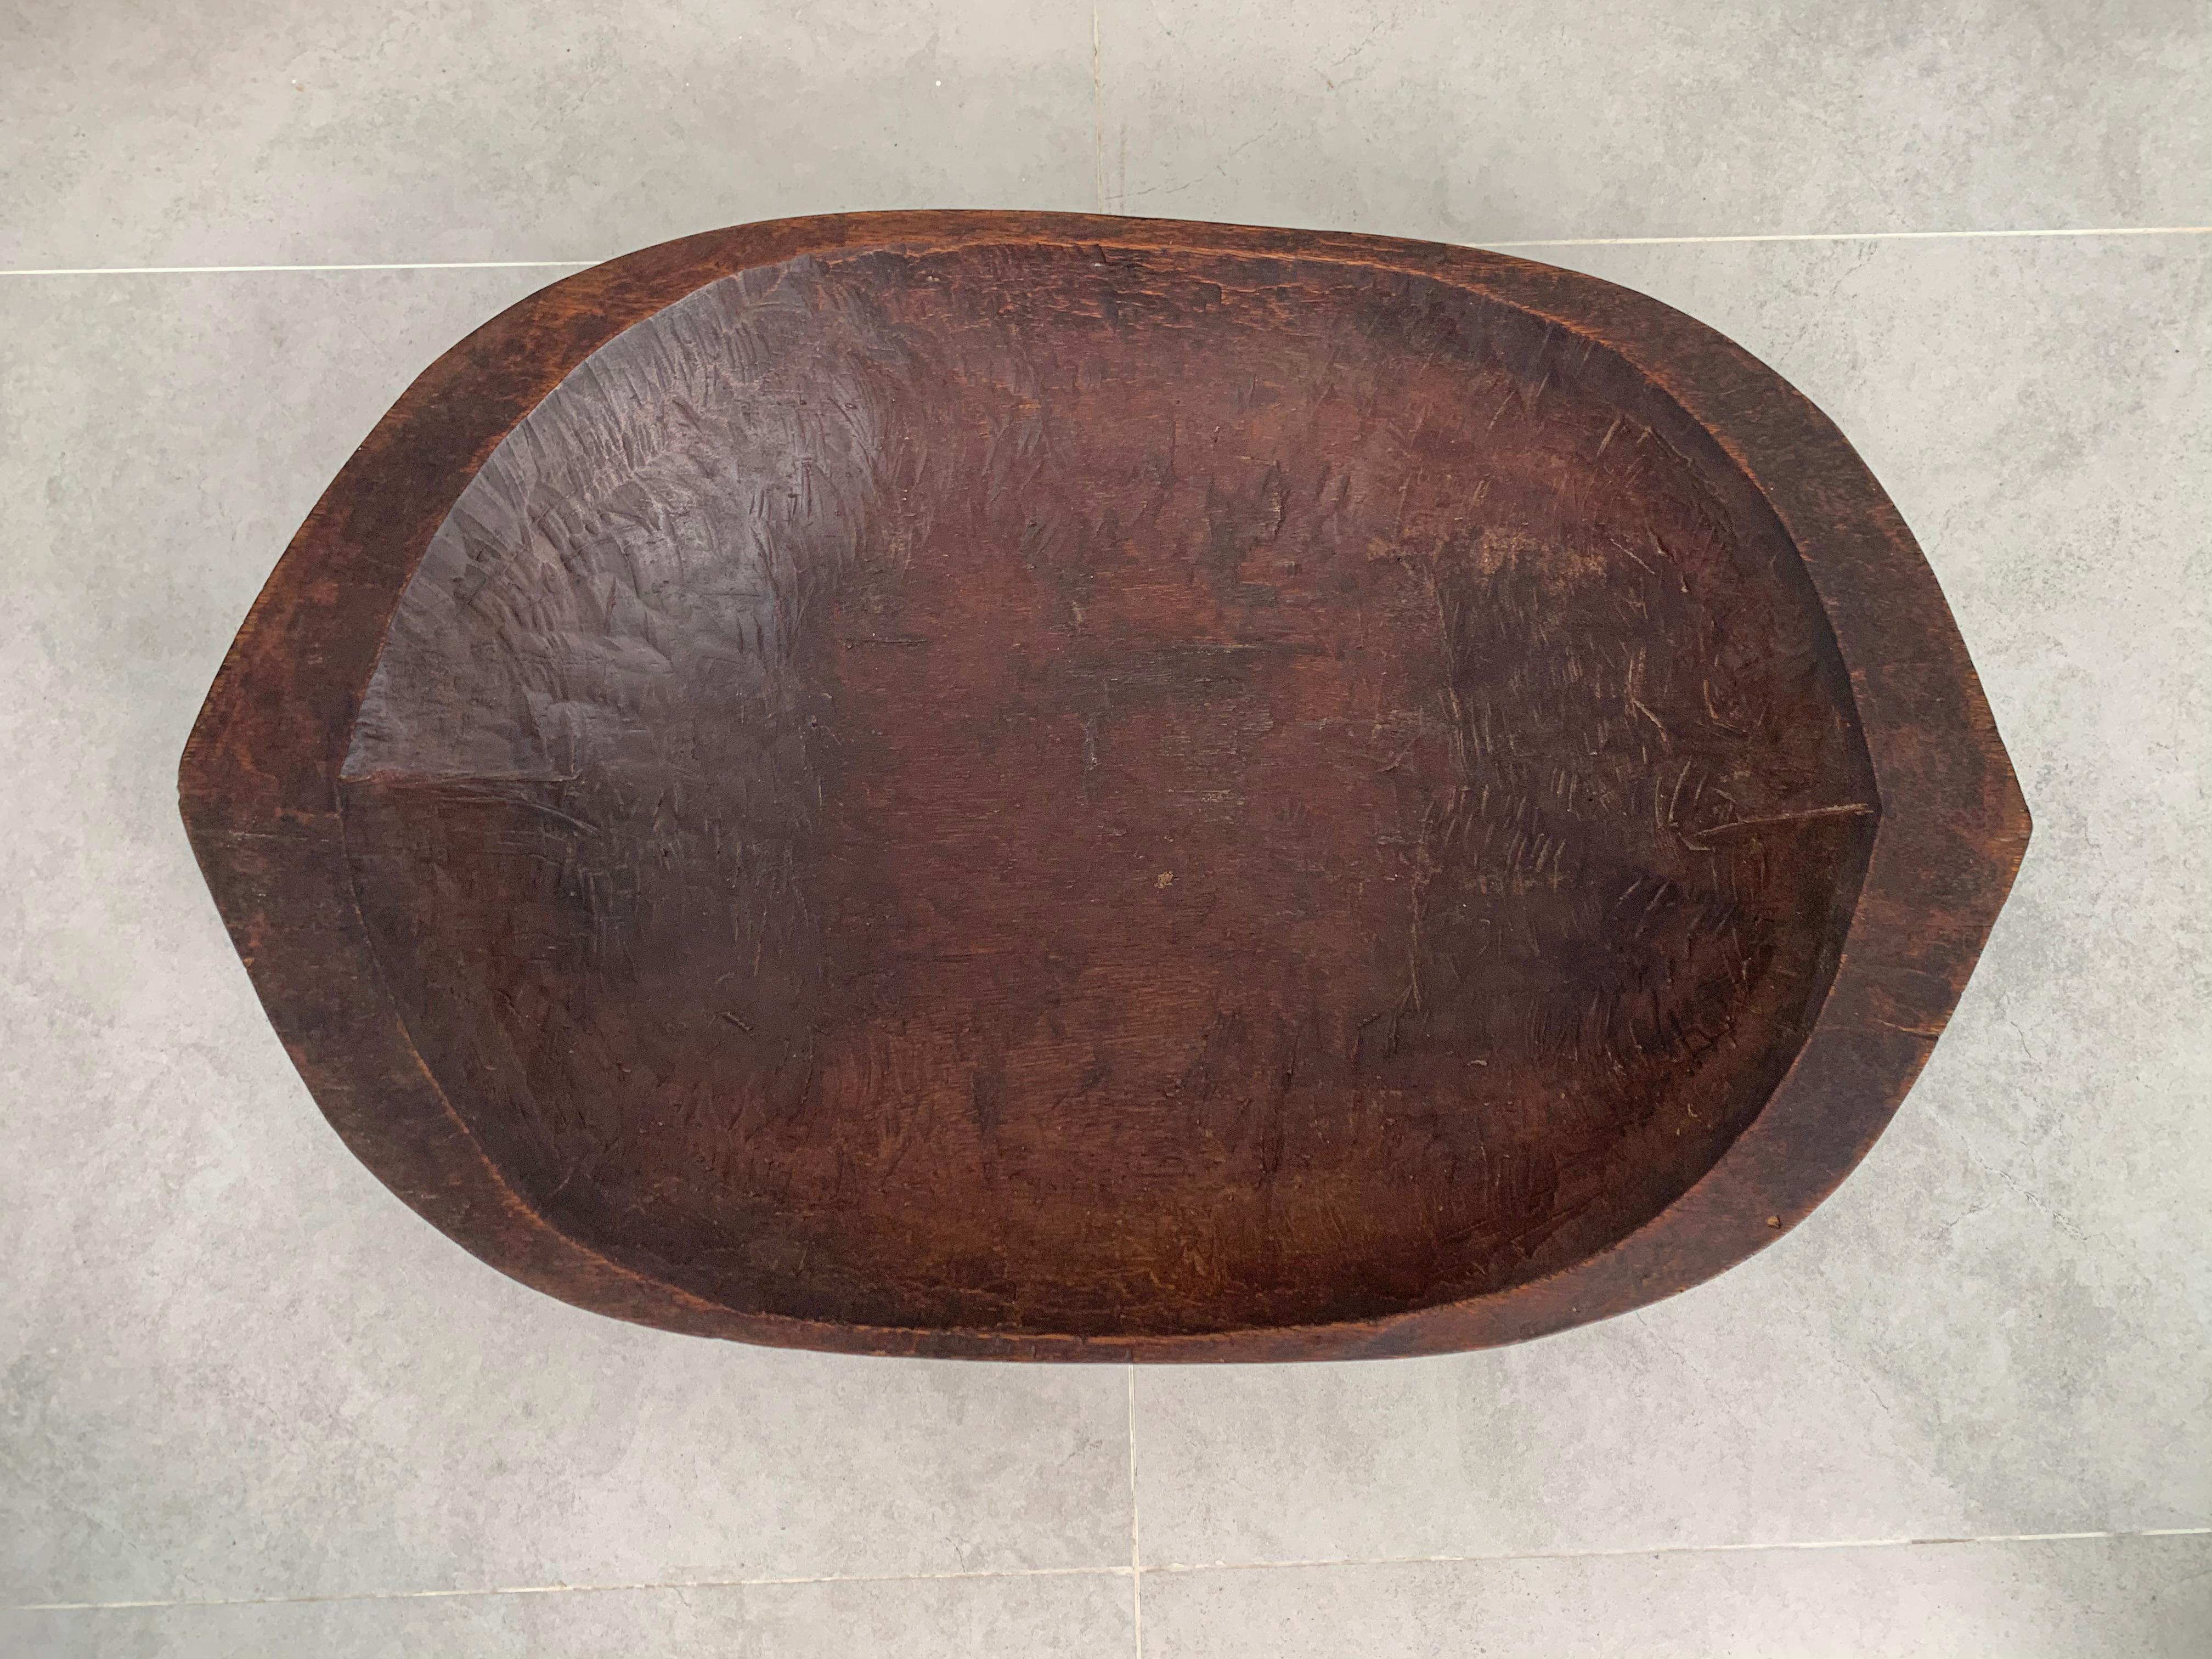 Other Hand-Carved Wooden Tray / Bowl Mentawai Tribe of Indonesia, Mid-20th Century For Sale